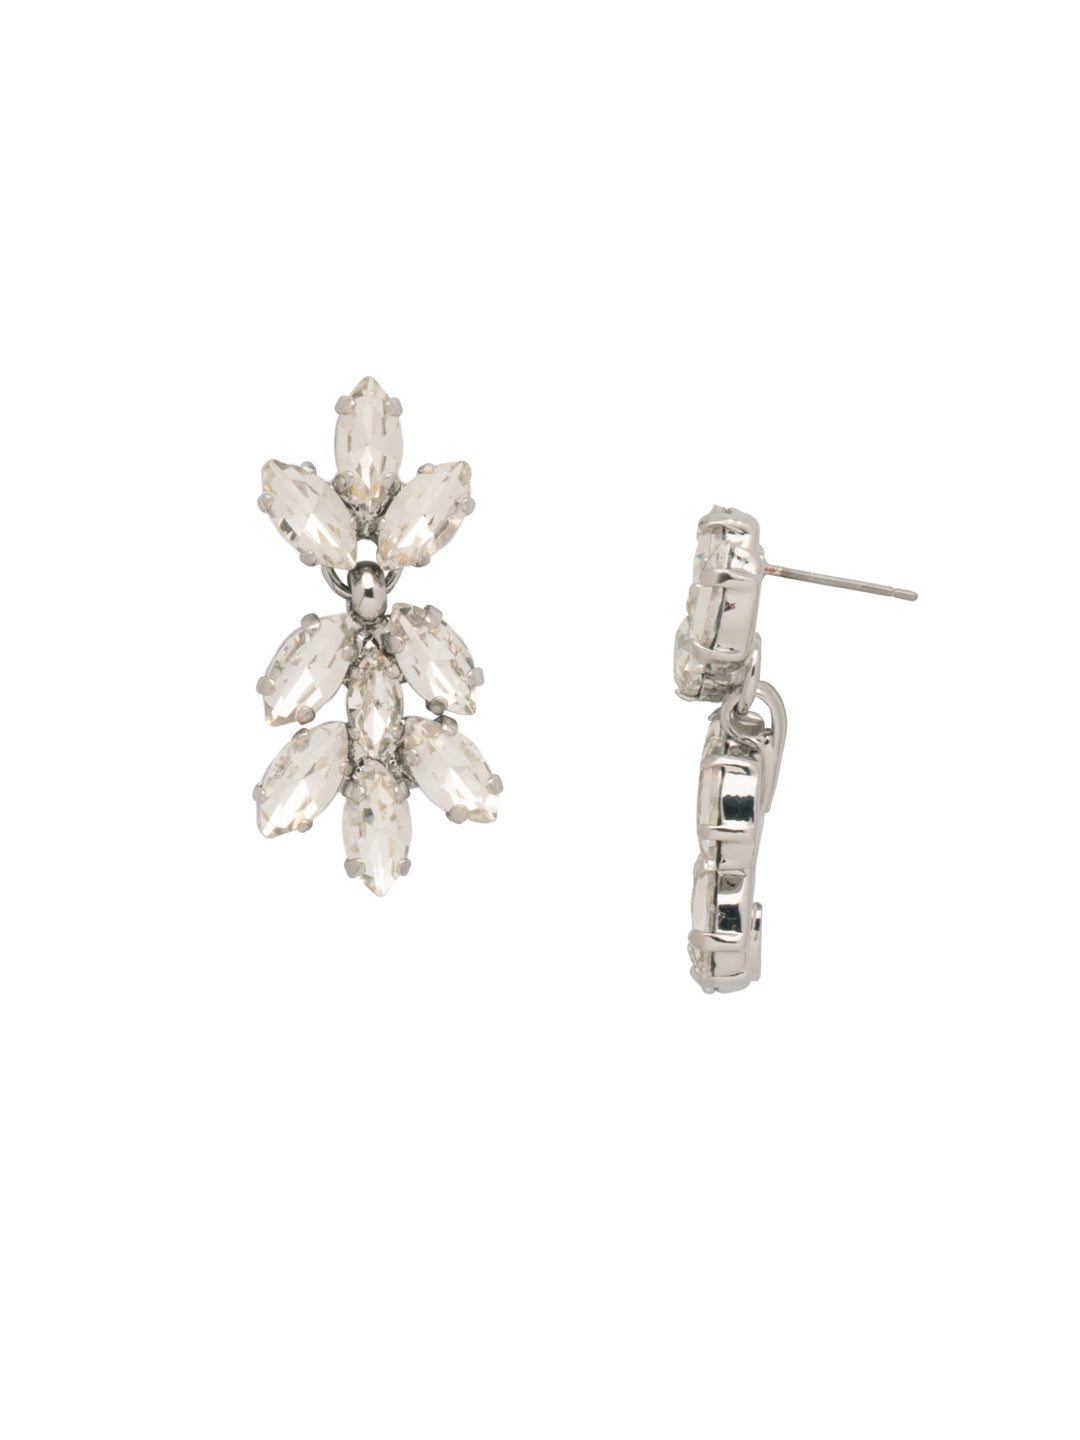 Rosalie Dangle Earrings - EFH11PDCRY - <p>The Rosalie Dangle Earrings feature sparkling navette crystals dangling from a post. From Sorrelli's Crystal collection in our Palladium finish.</p>